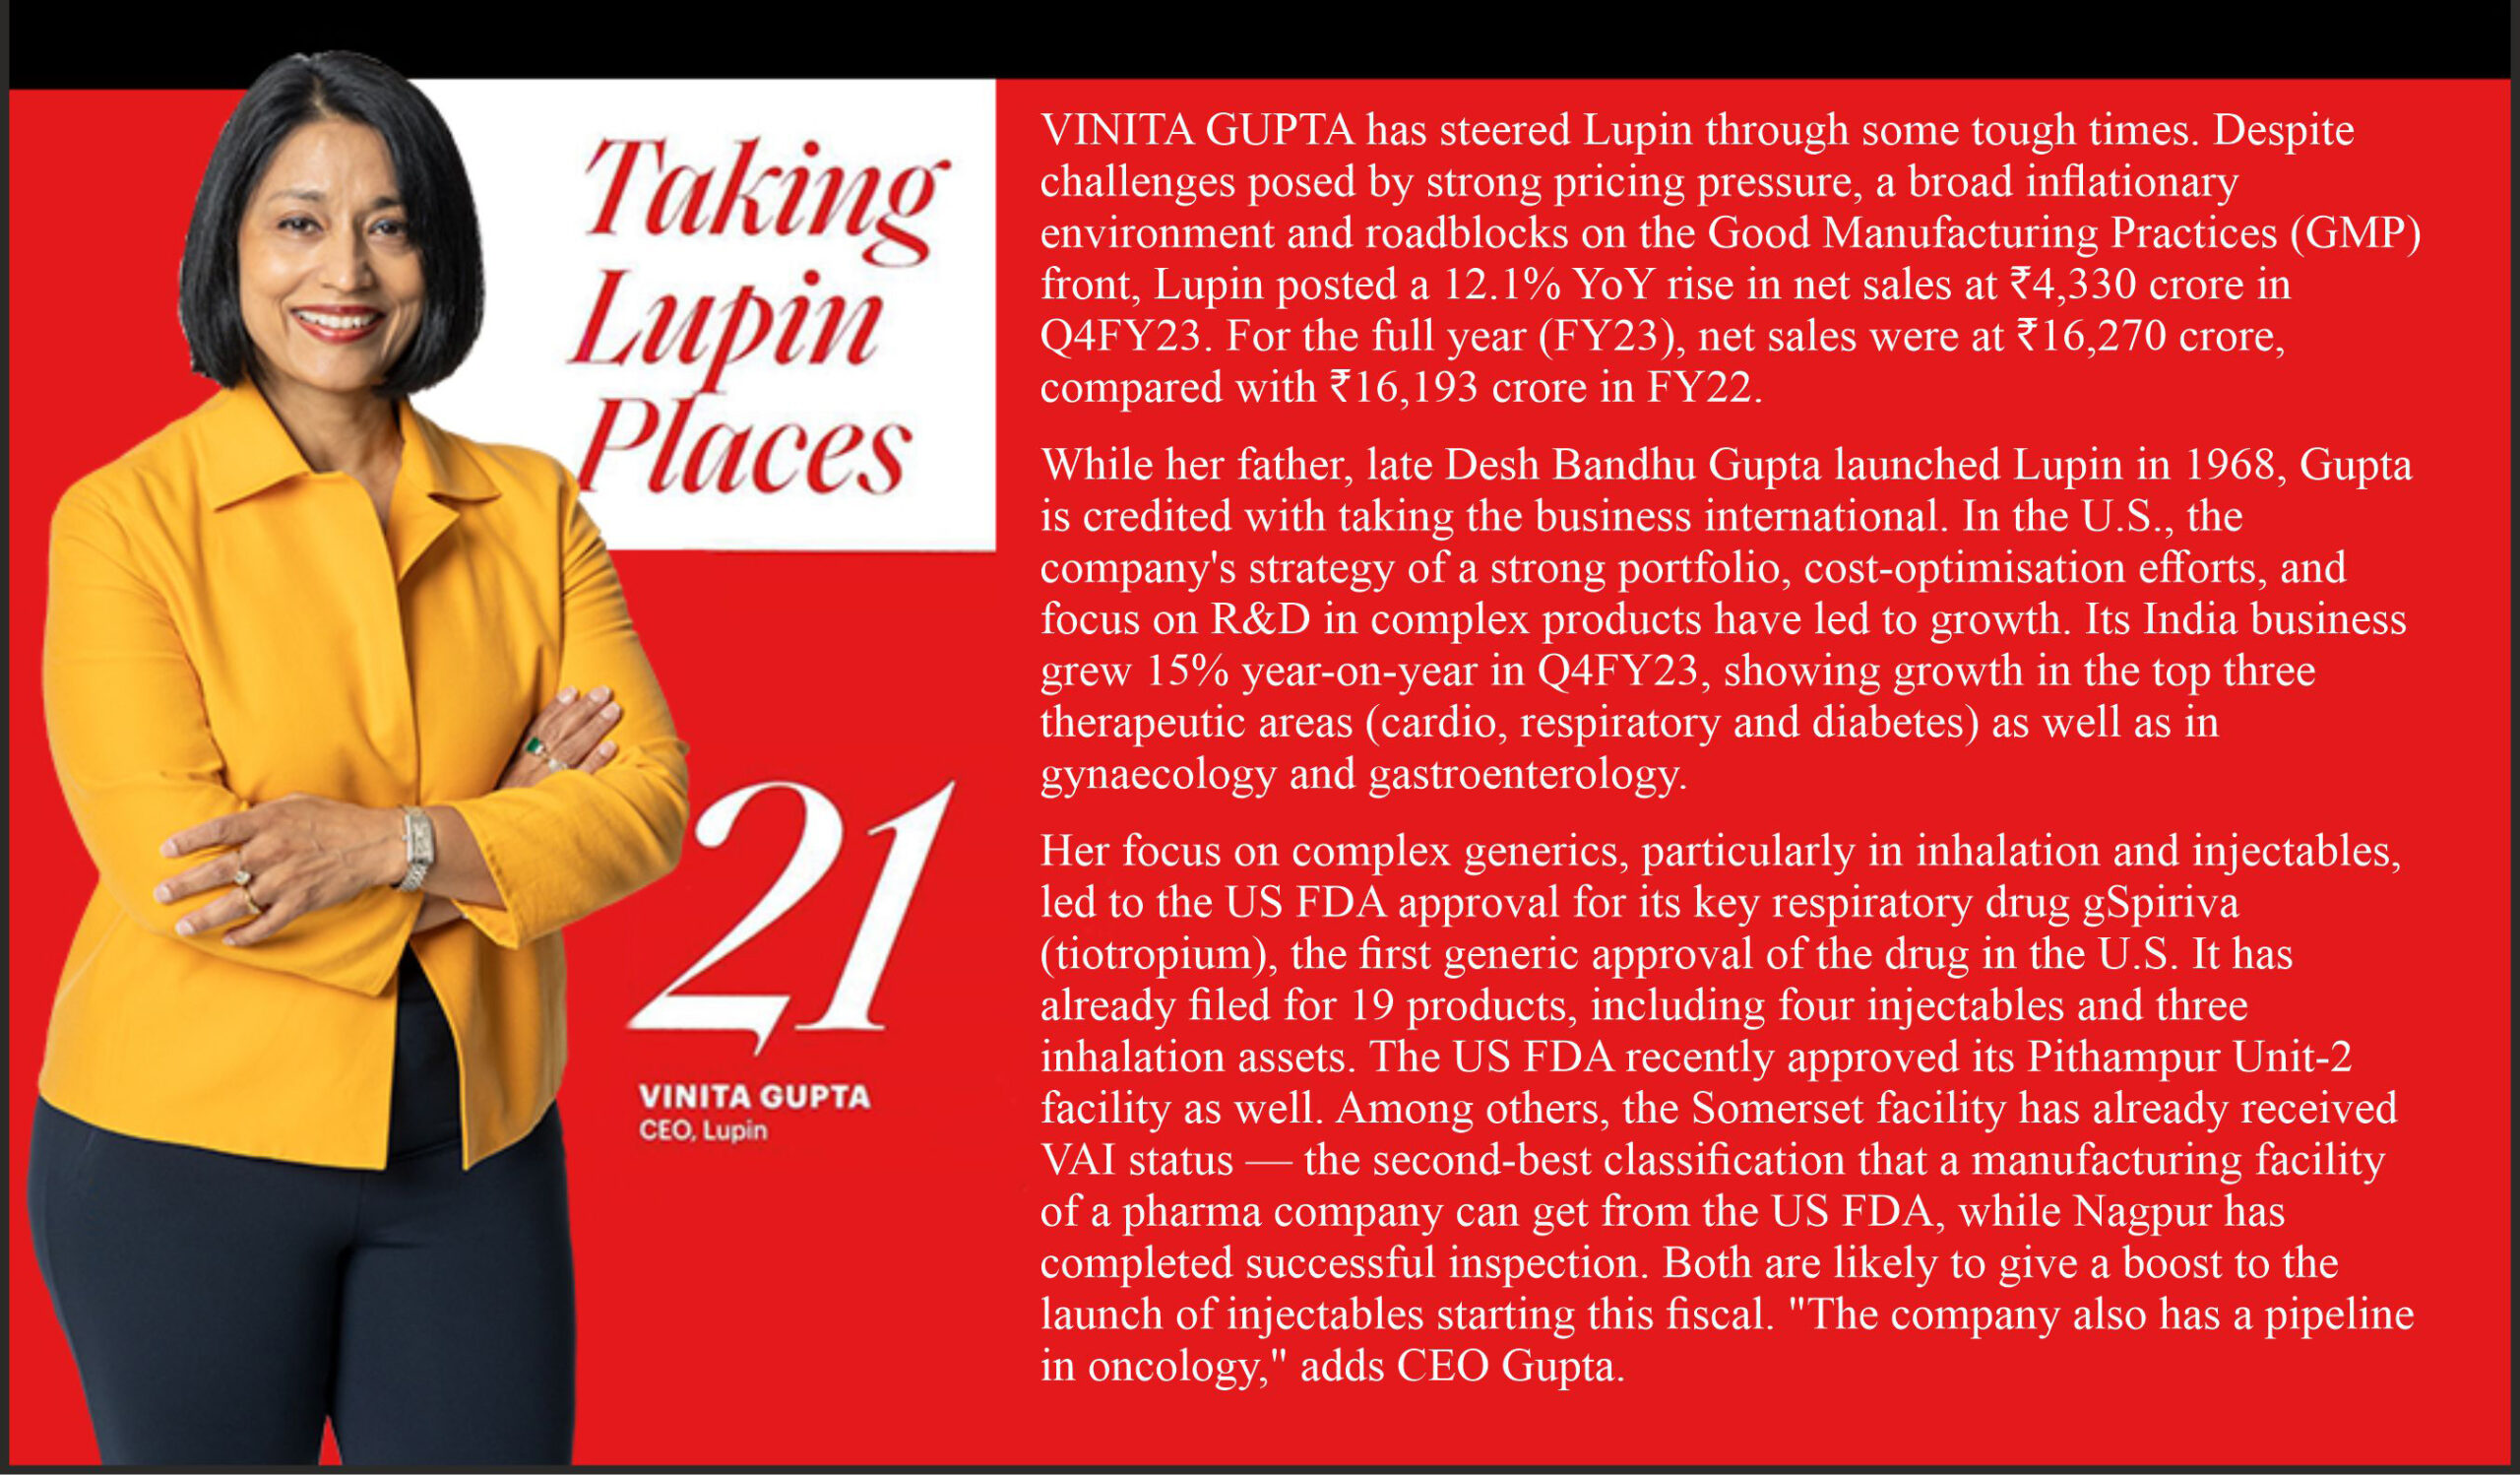 Vinita Gupta featured in India's 50 Most Power Women in Business by Fortune India